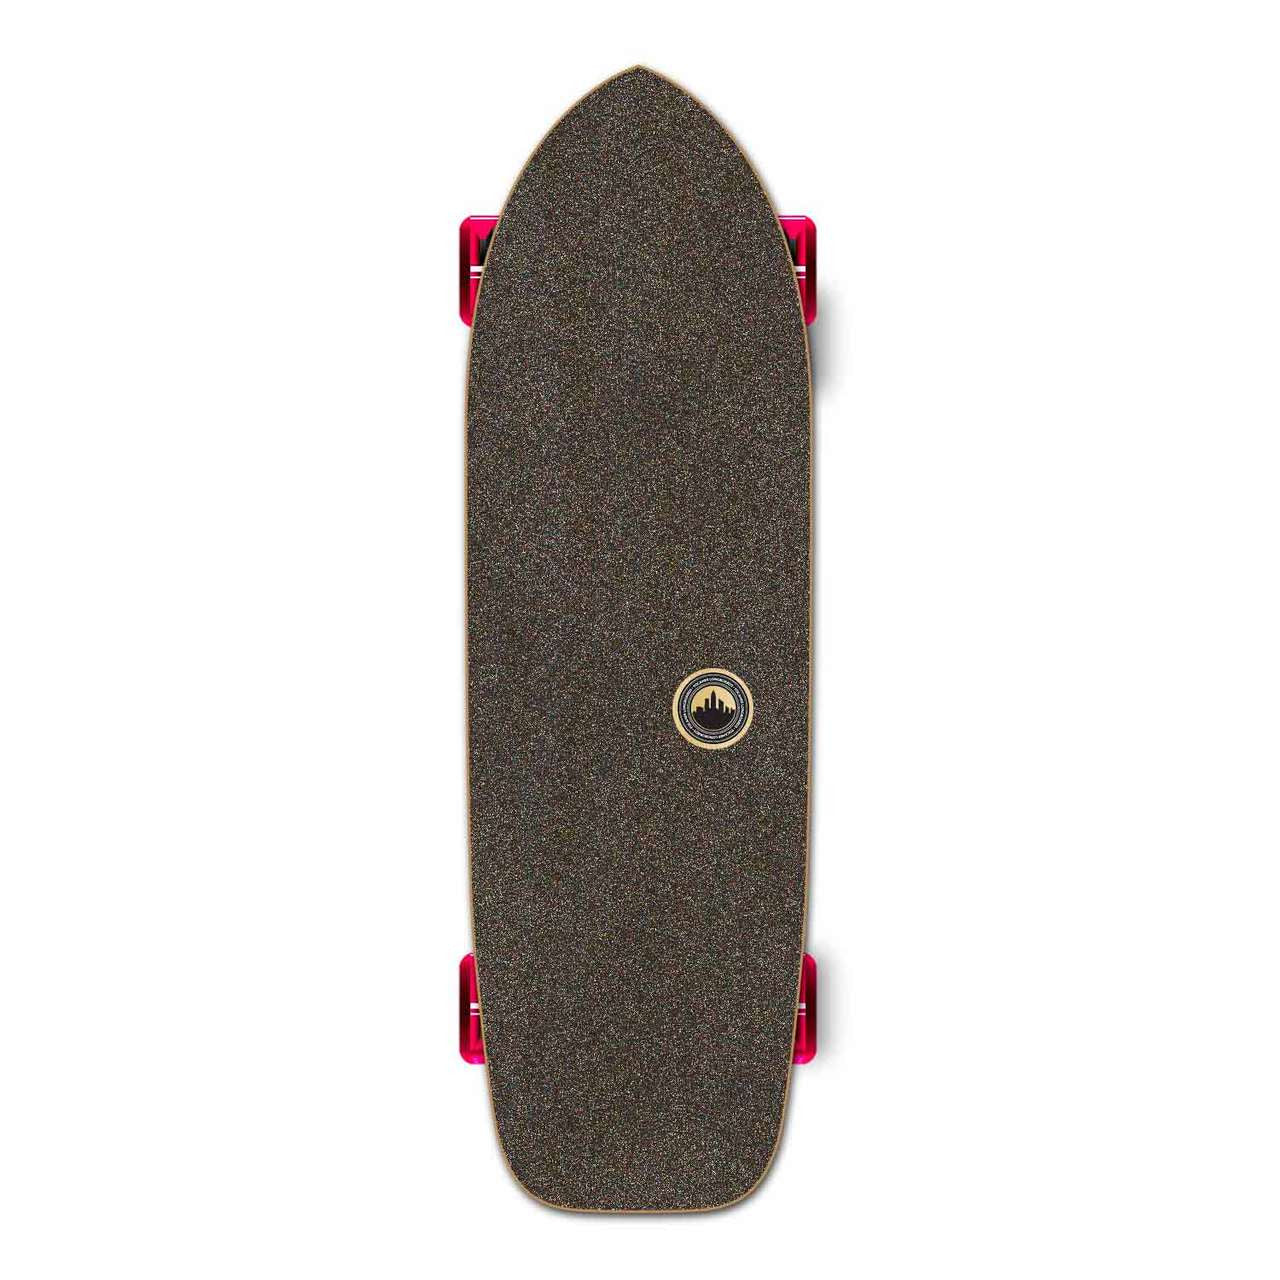 Yocaher Old School Longboard Complete - Natural